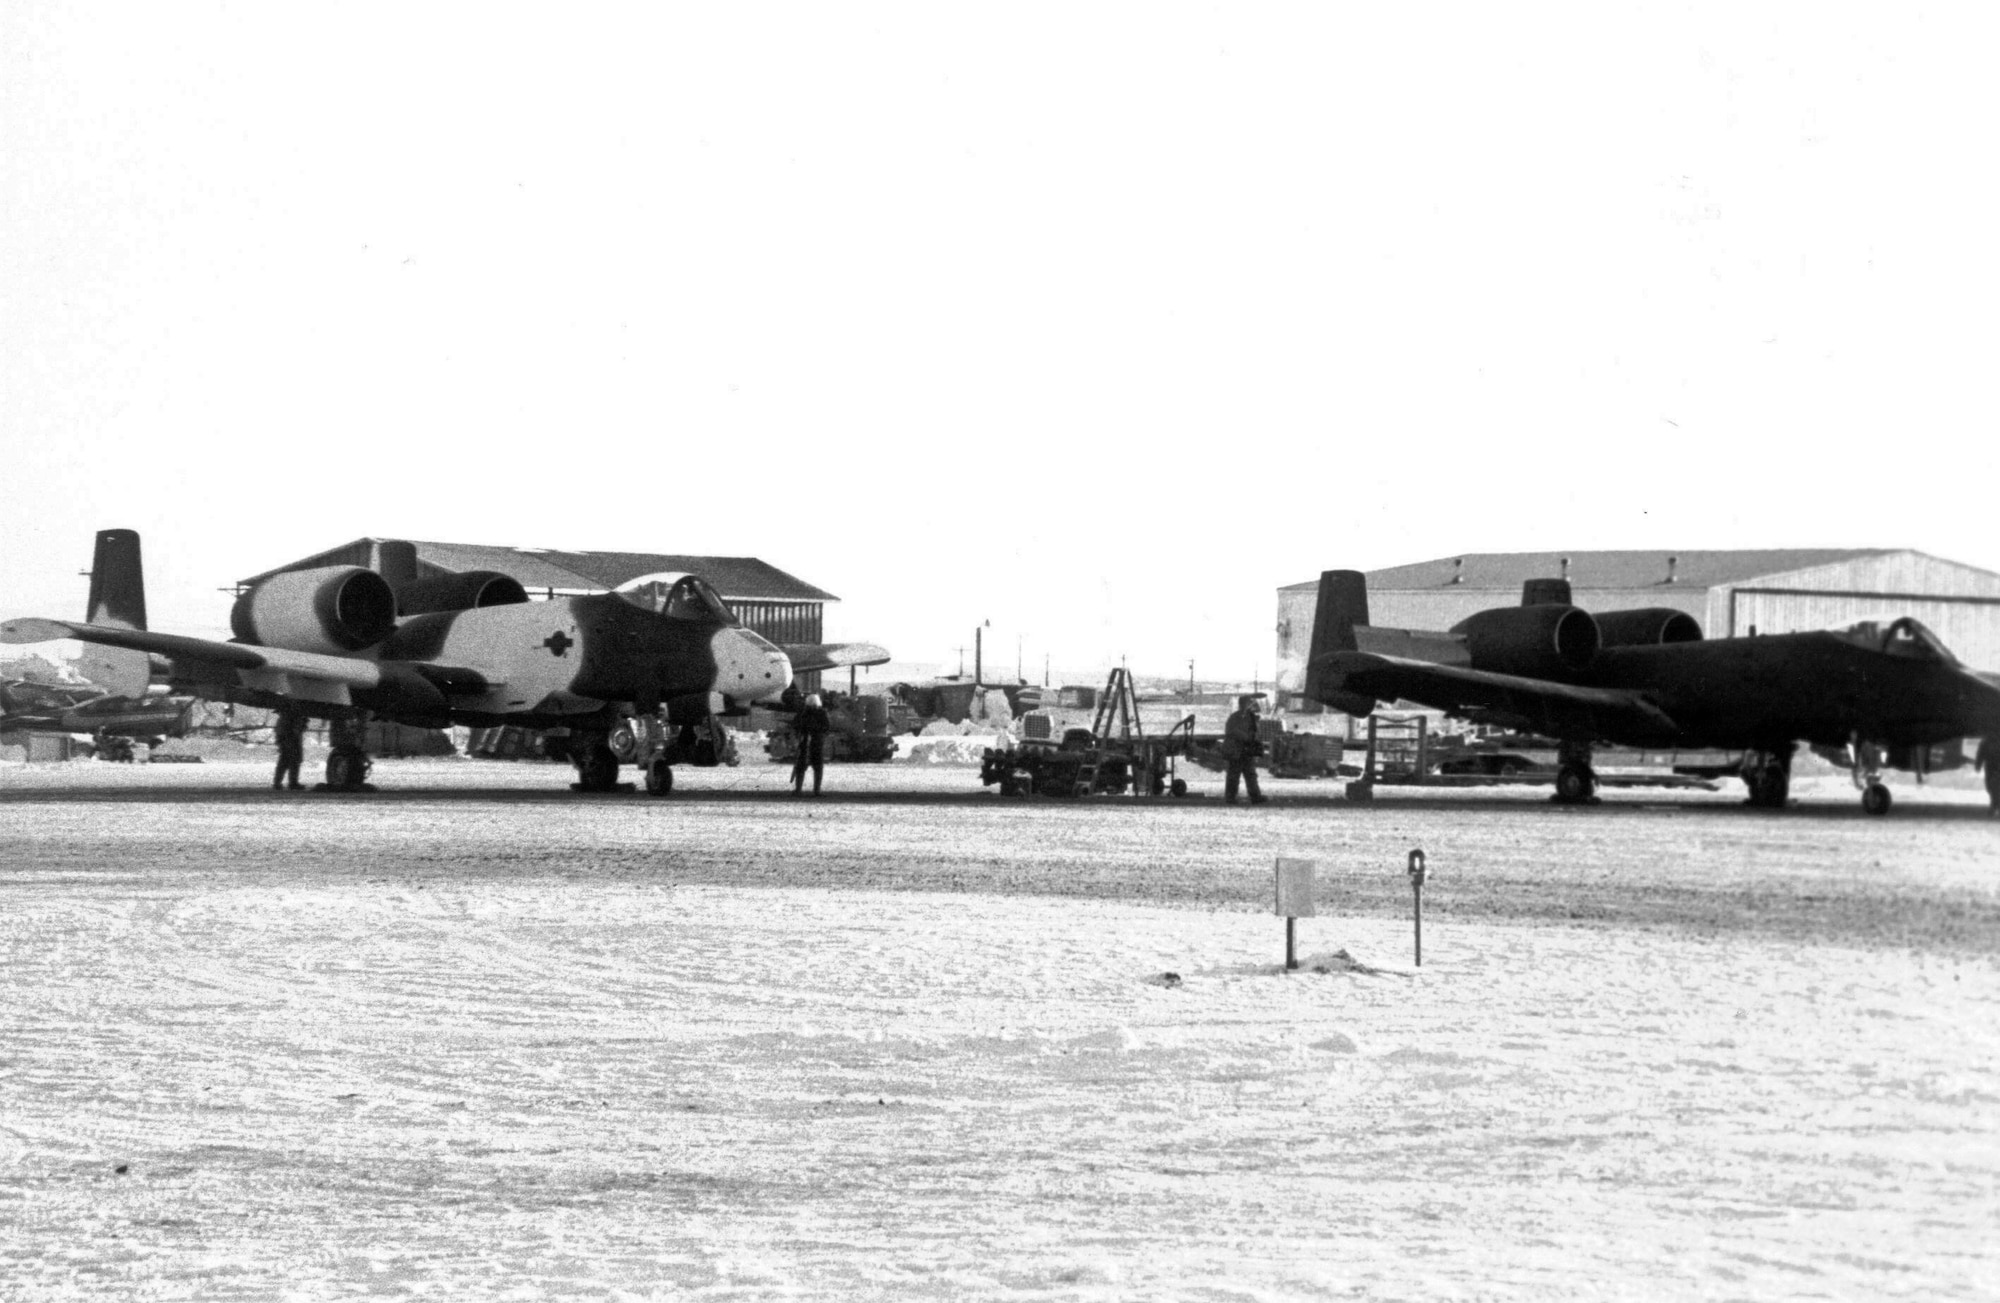 EIELSON AIR FORCE BASE, Alaska--An A-10 with an arctic paint scheme sits next to an A-10 with a regular all gray or green paint scheme sit on the flightline March 1982. That year, an A-10 was repainted in an arctic camouflage scheme as an experiment for an upcoming exercise titled OPERATION Cool Snow Hog. (File photo)